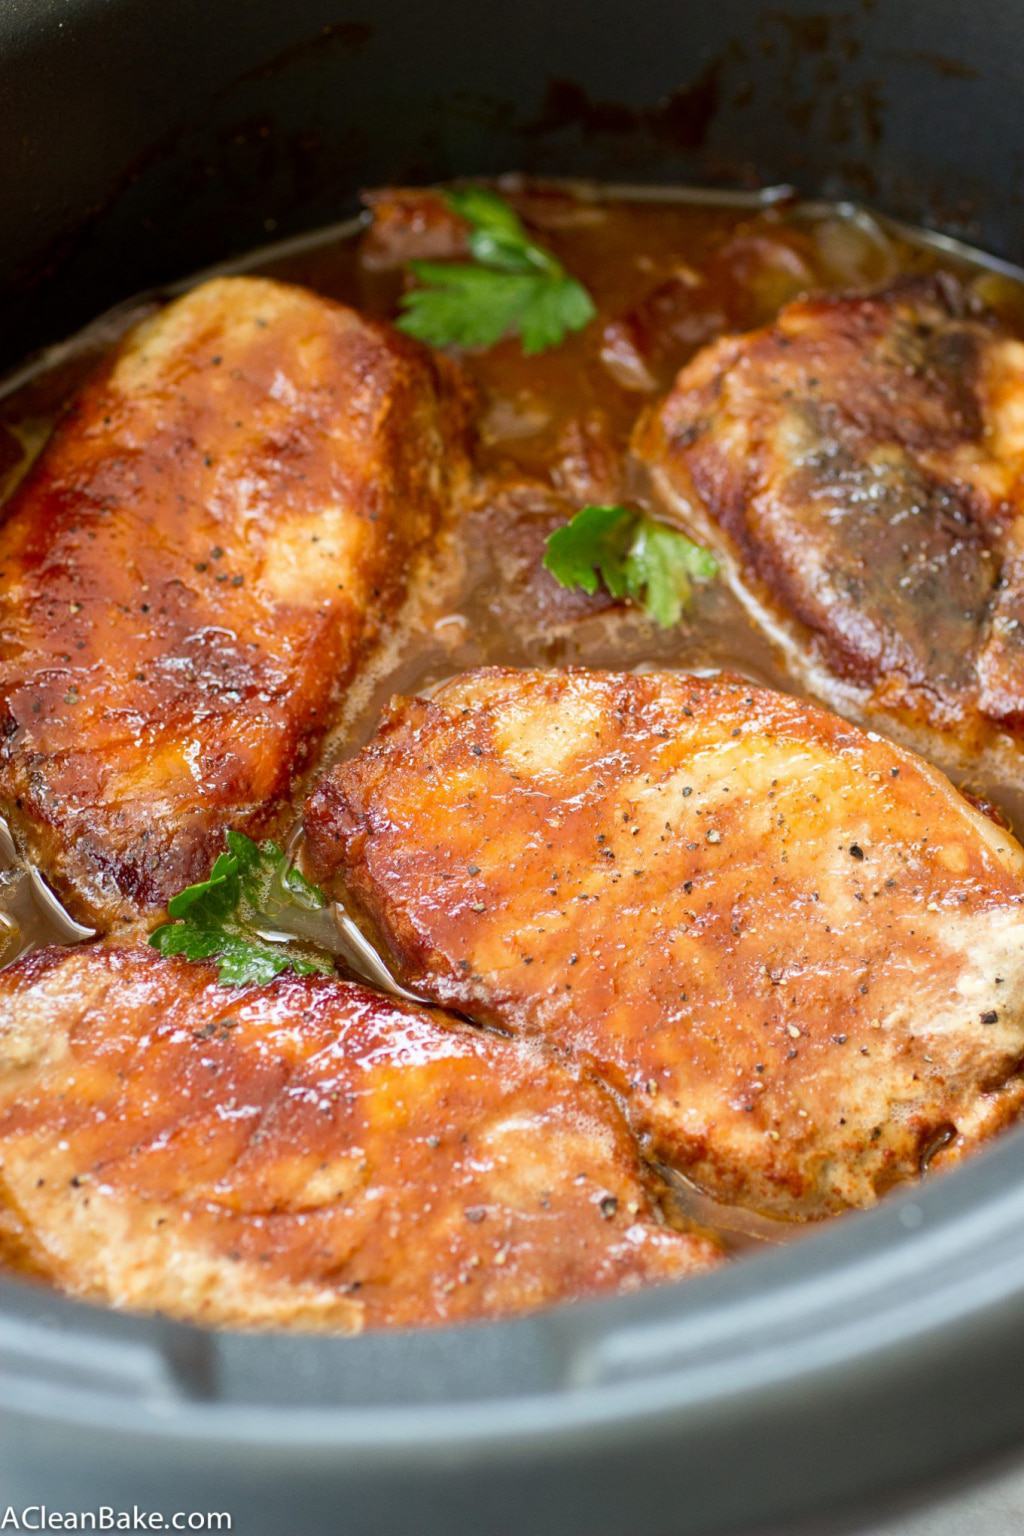 Crockpot Pork Chops with Apples and Onions (Gluten Free